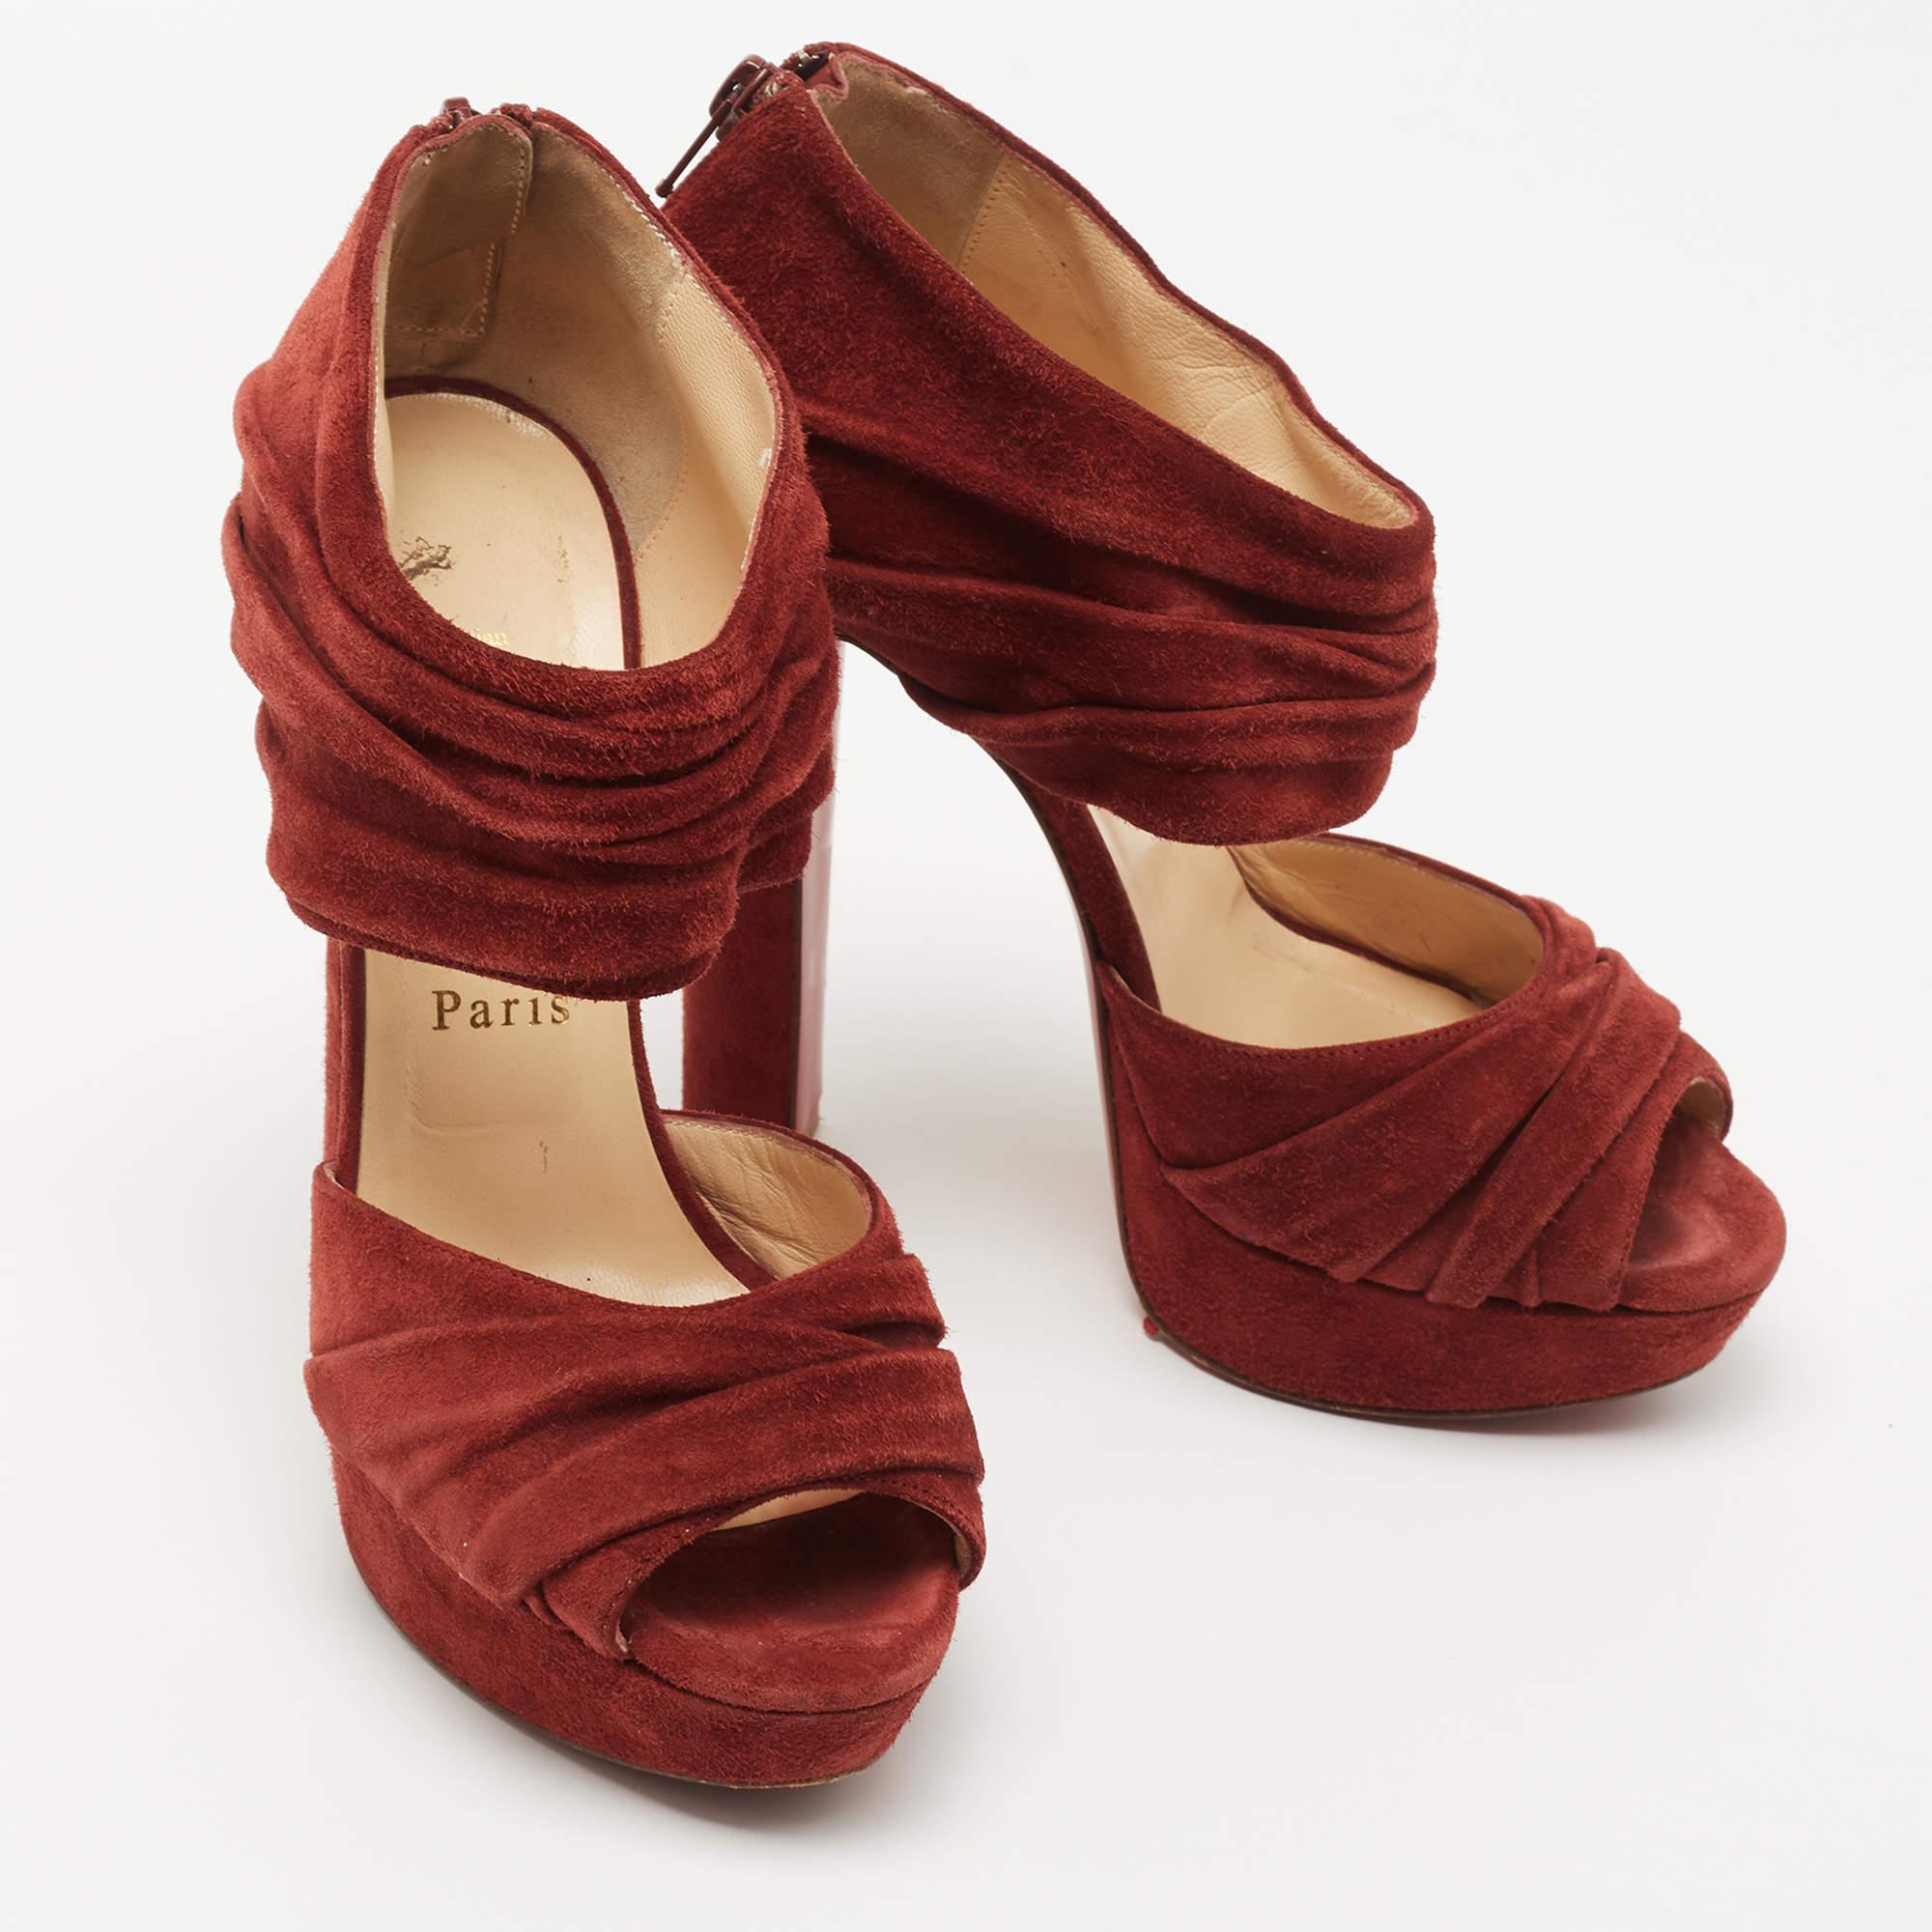 Women's Christian Louboutin Rust Red Suede Pleated Bandra Zip Platform Sandals Size 37 For Sale